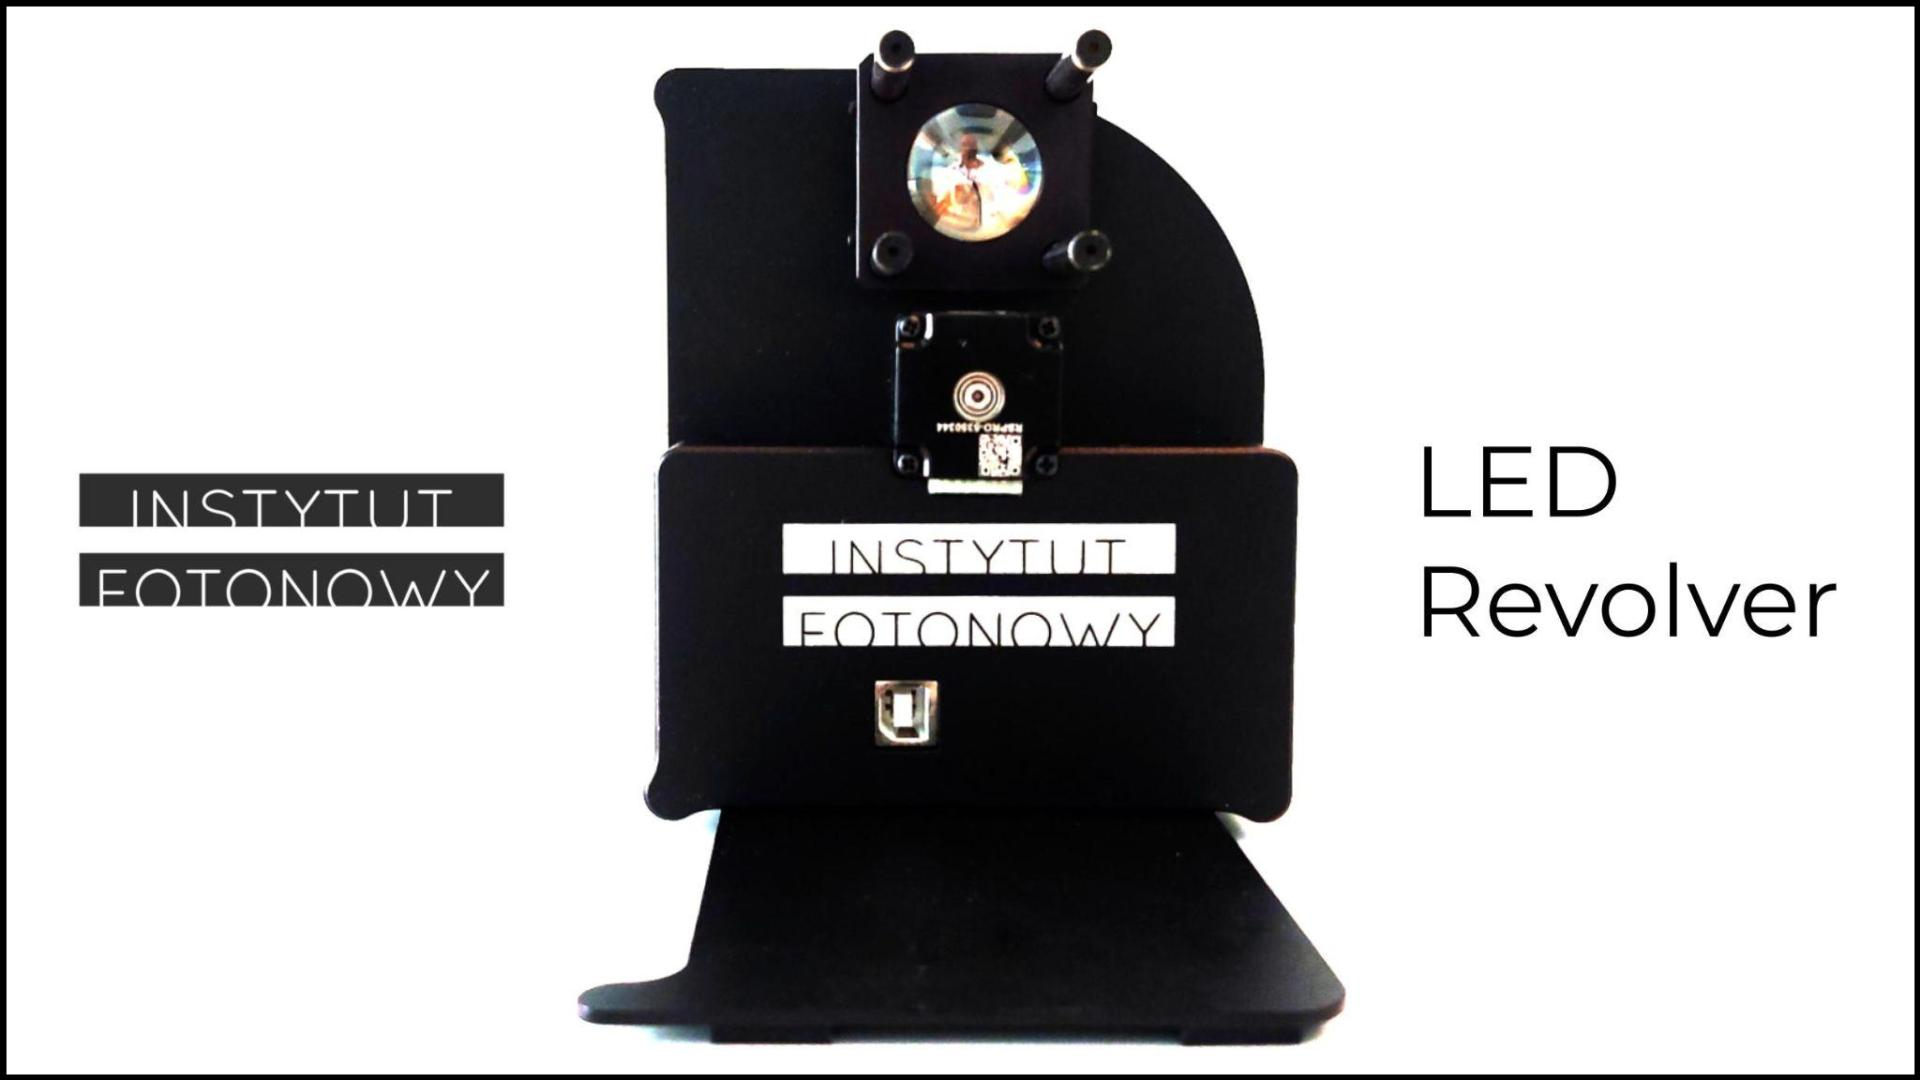 LED Revolver - compact, switchable, user-friendly light source